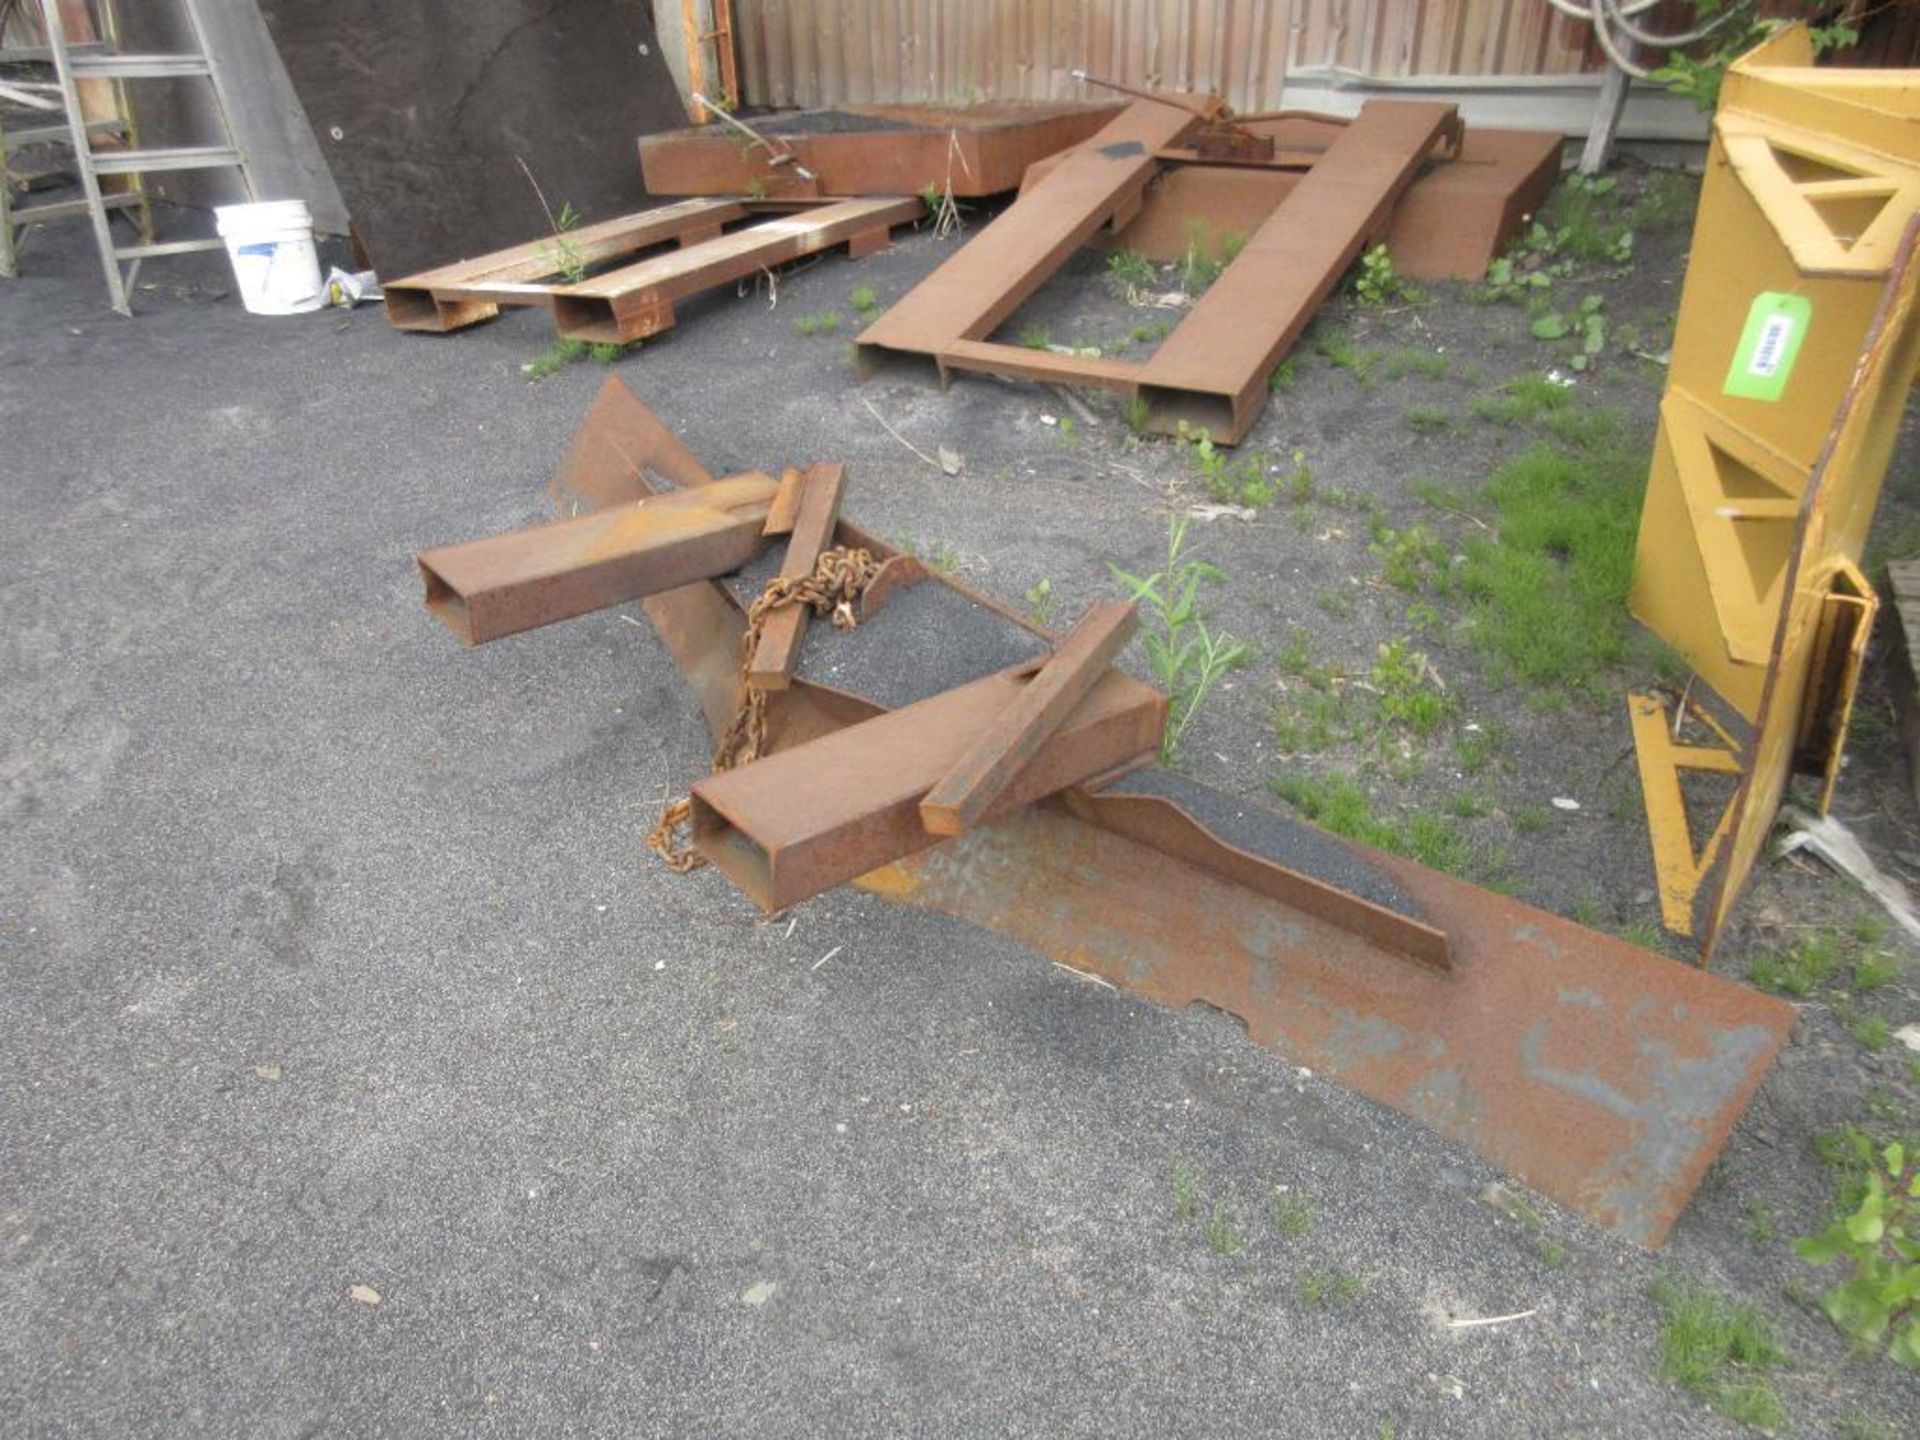 LOT OF 6 SNOW PLOUGH IBG.GRATING FOR TRUCK ATTACHMENTS (NORTH PAINT BLDG) - Image 11 of 14